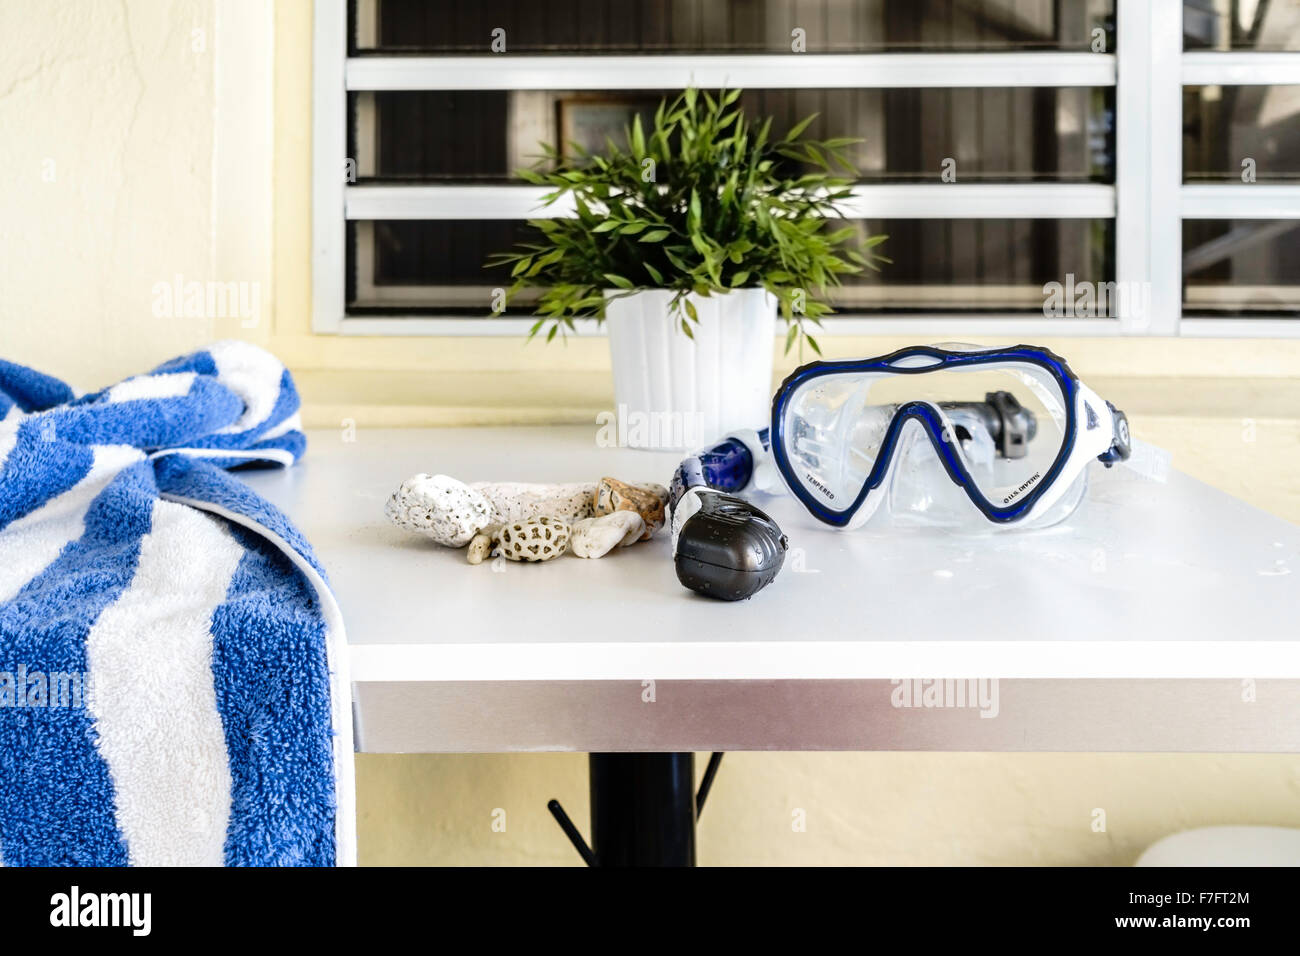 A wet snorkel and mask and a beach towel lies on a table with a collection of beach rocks. St. Croix, U.S. Virgin Islands. Stock Photo